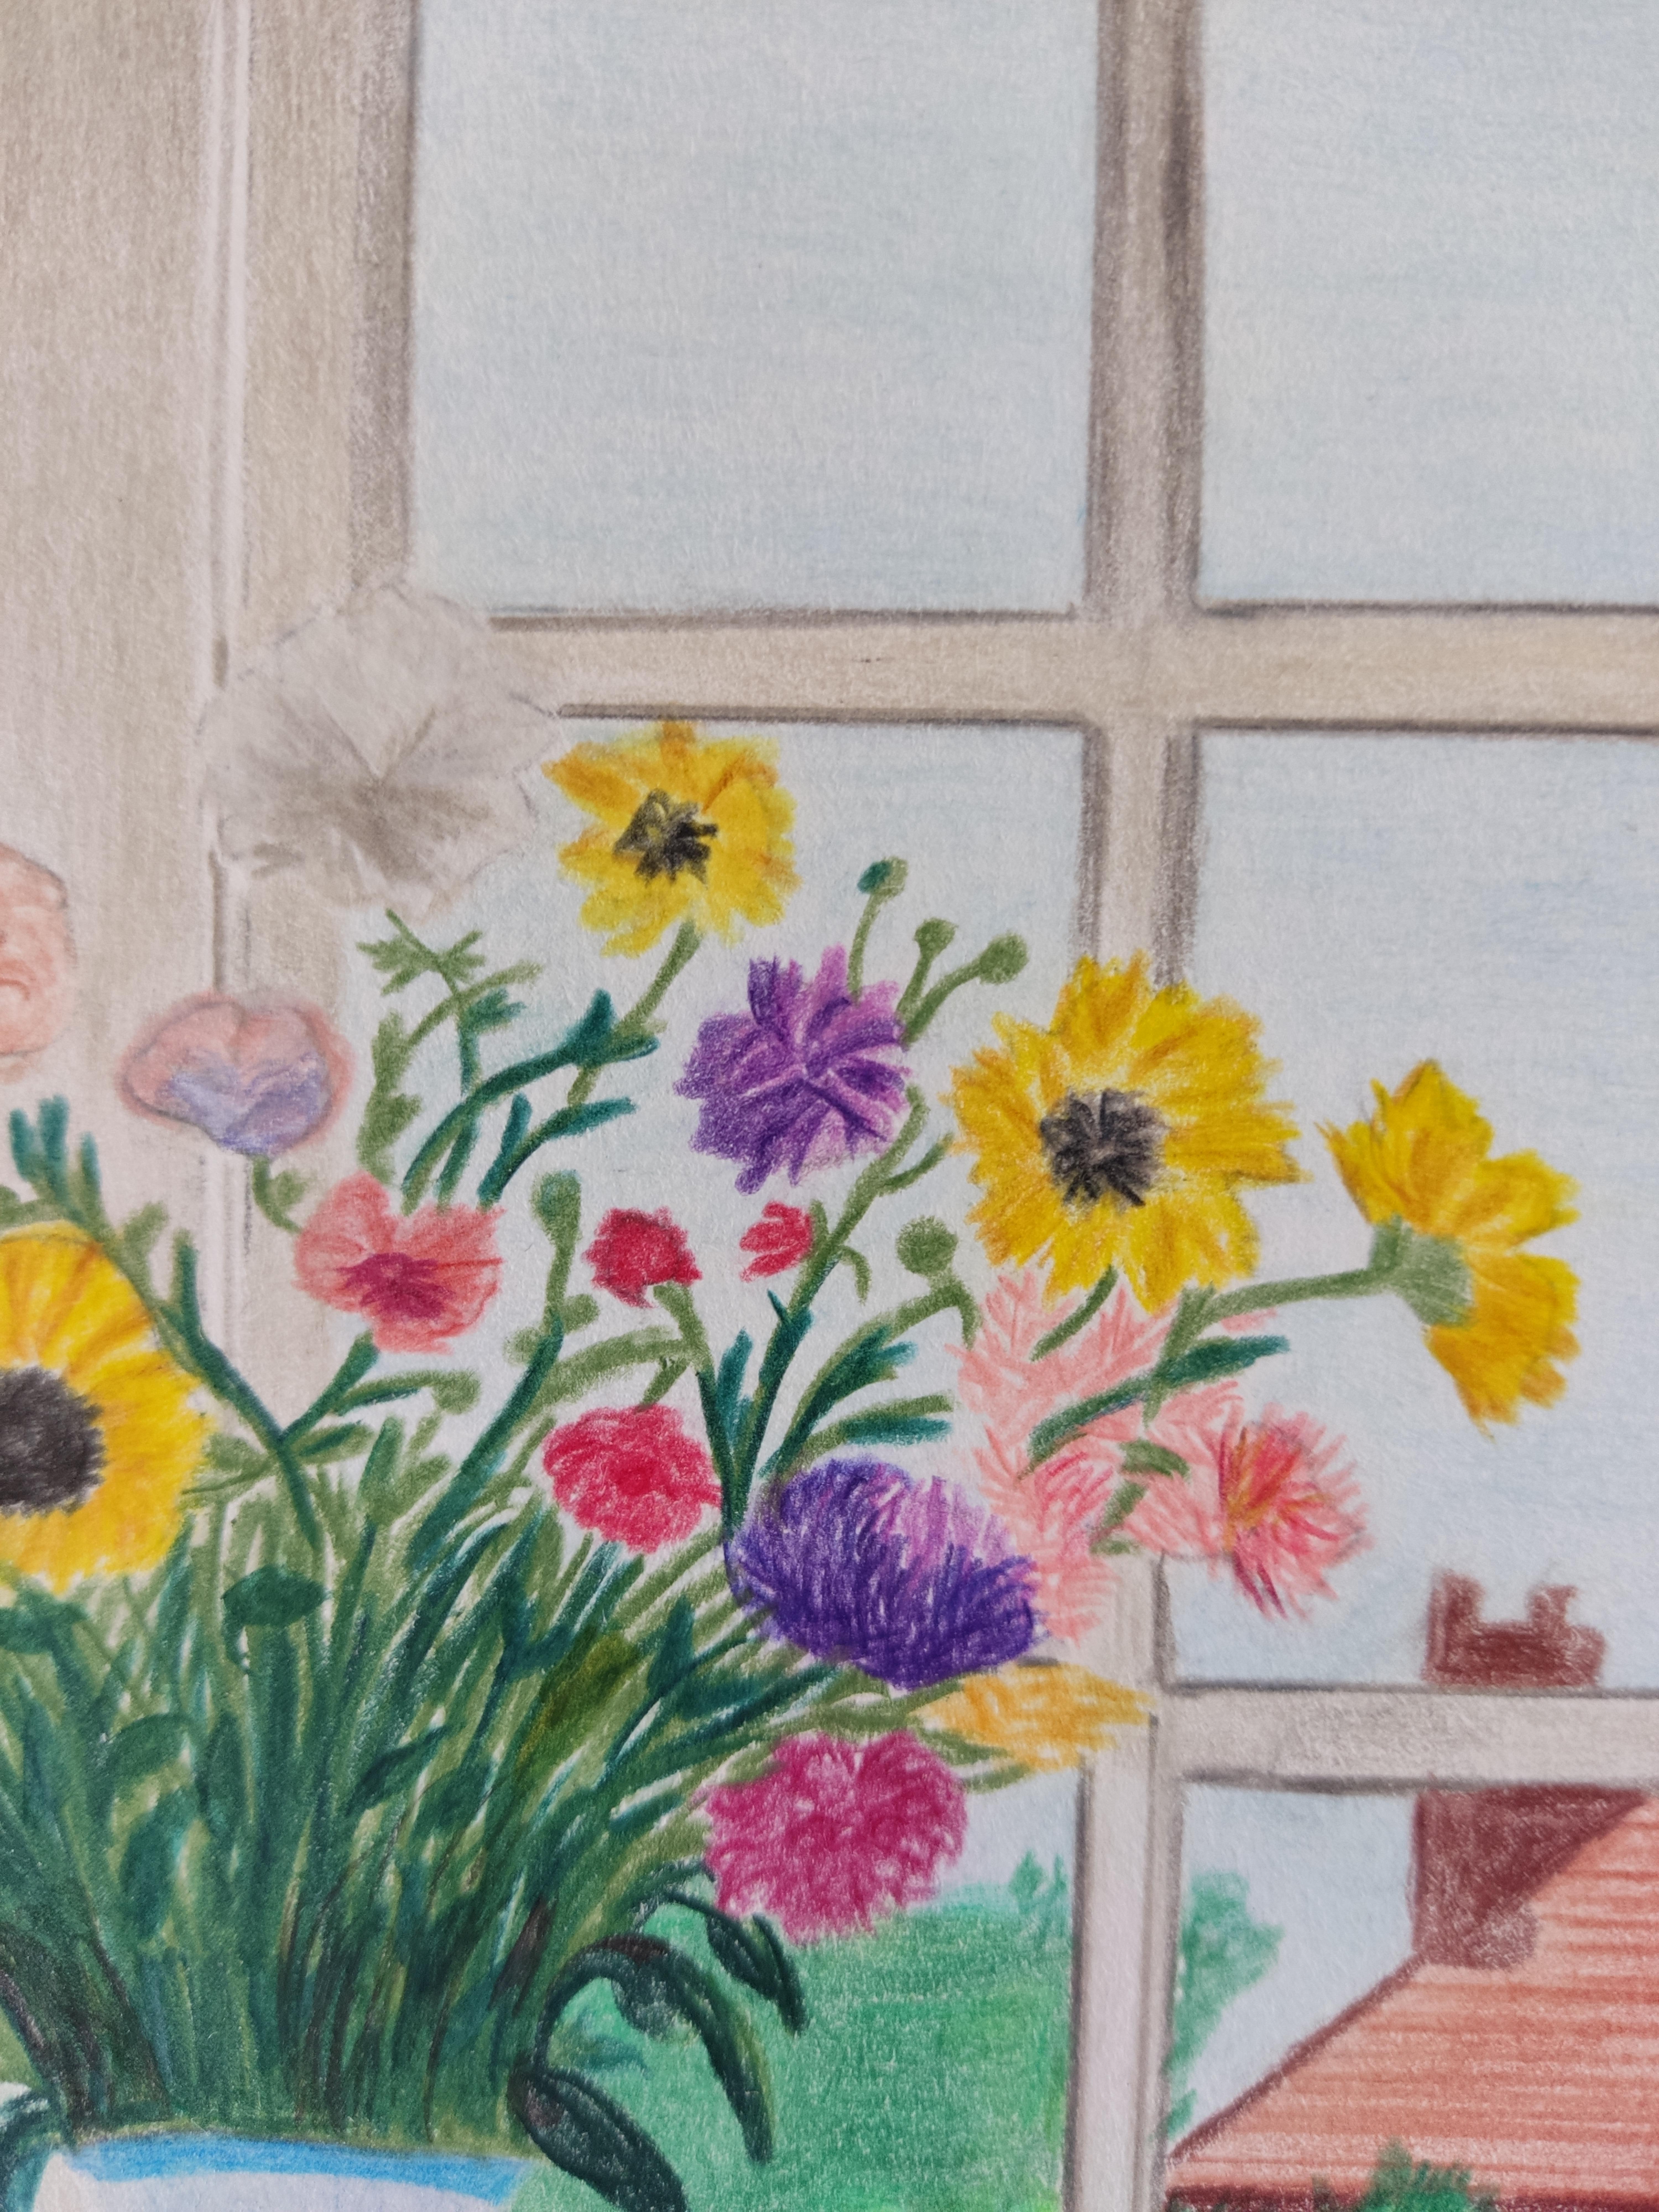 News From a Faraway Land, Original Drawing, Interior Scene, Vase, flowers For Sale 6